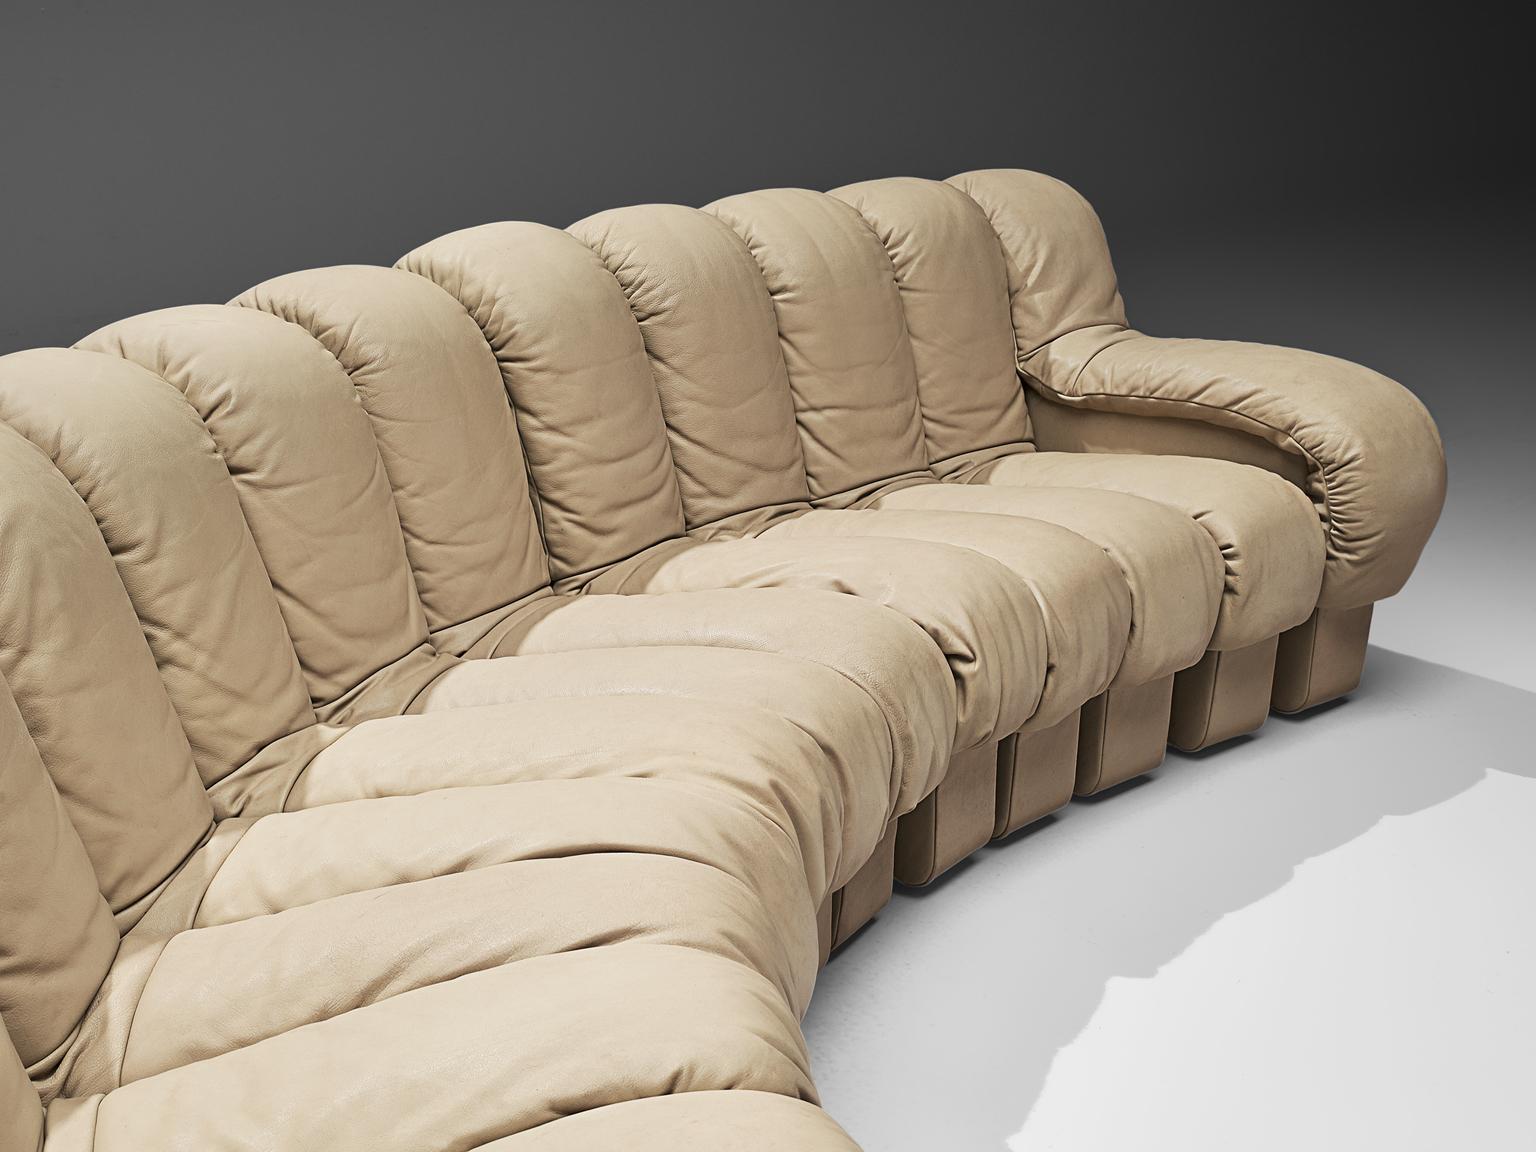 Swiss De Sede 'Snake' DS-600 Non Stop Sofa in Sand Leather